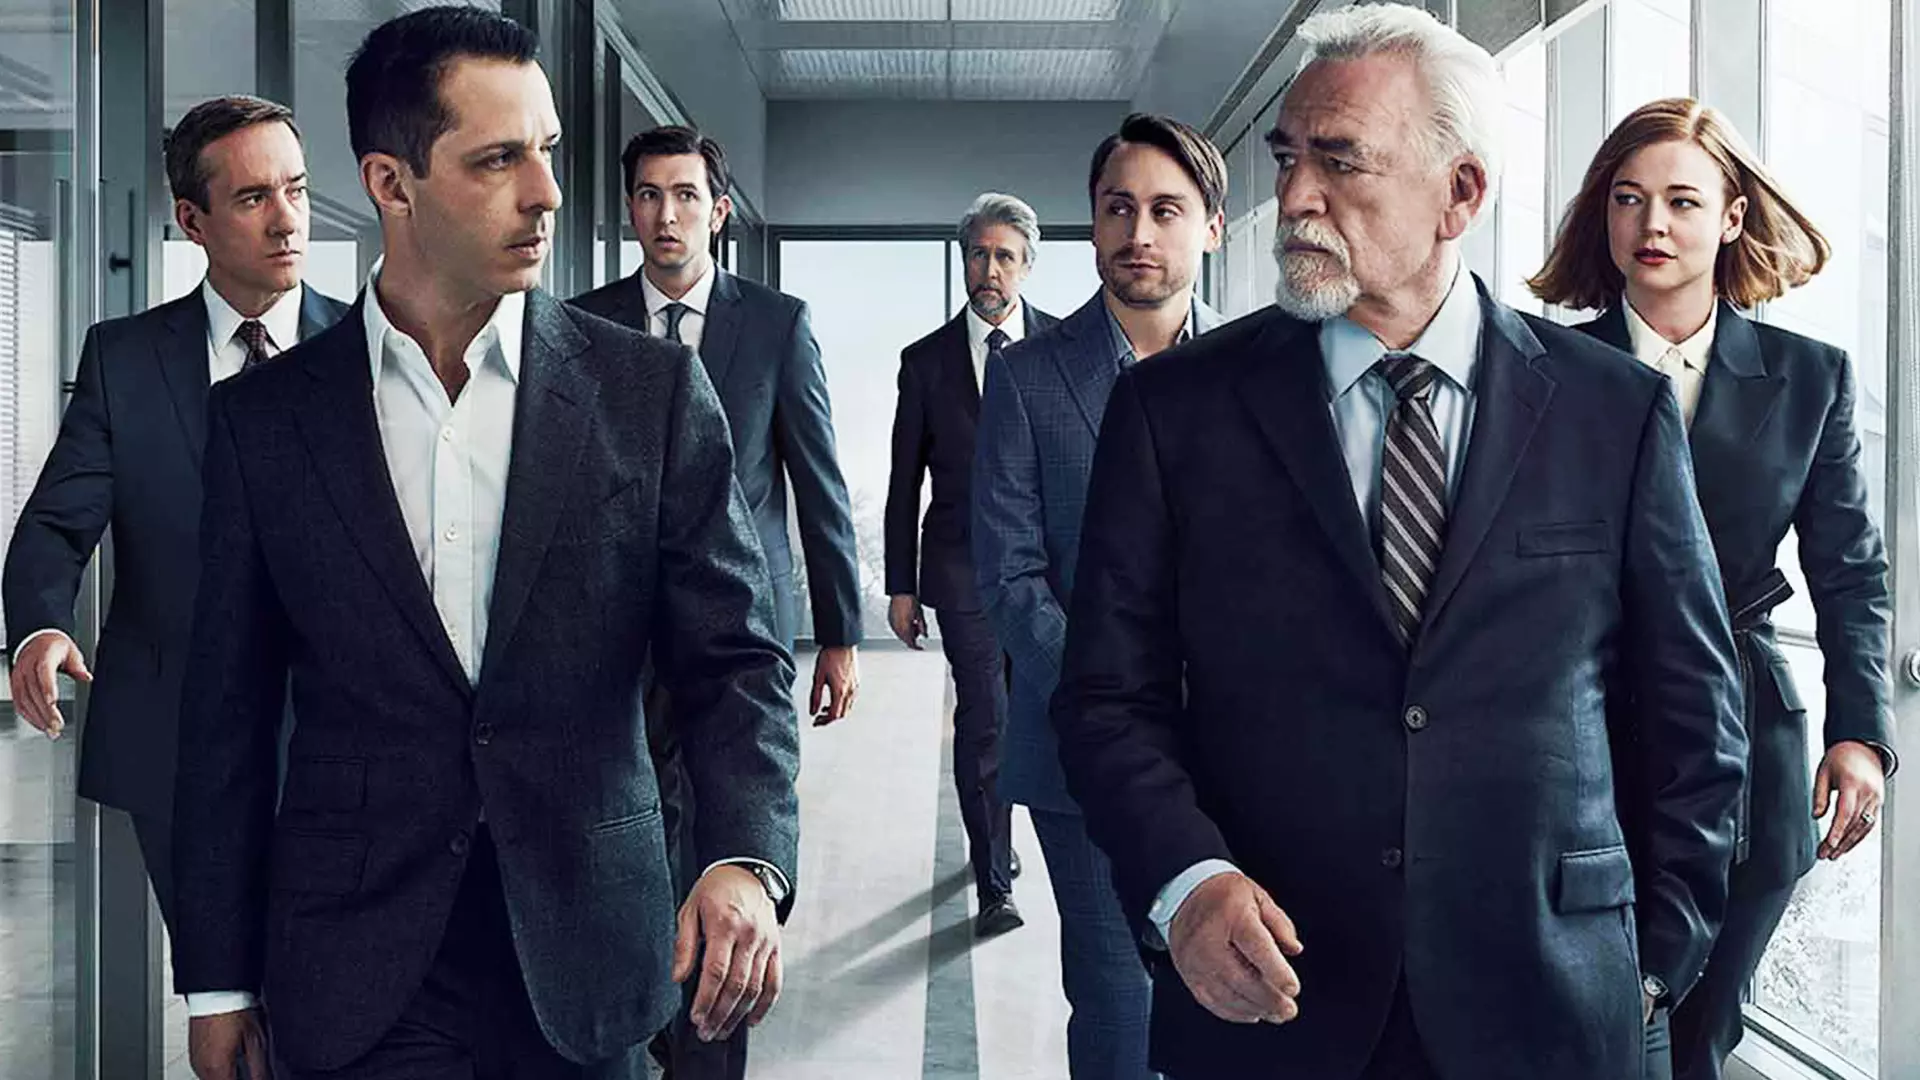 Created by Jesse Armstrong, Succession premiered on HBO in 2018 and soon acquired a dedicated fan base.